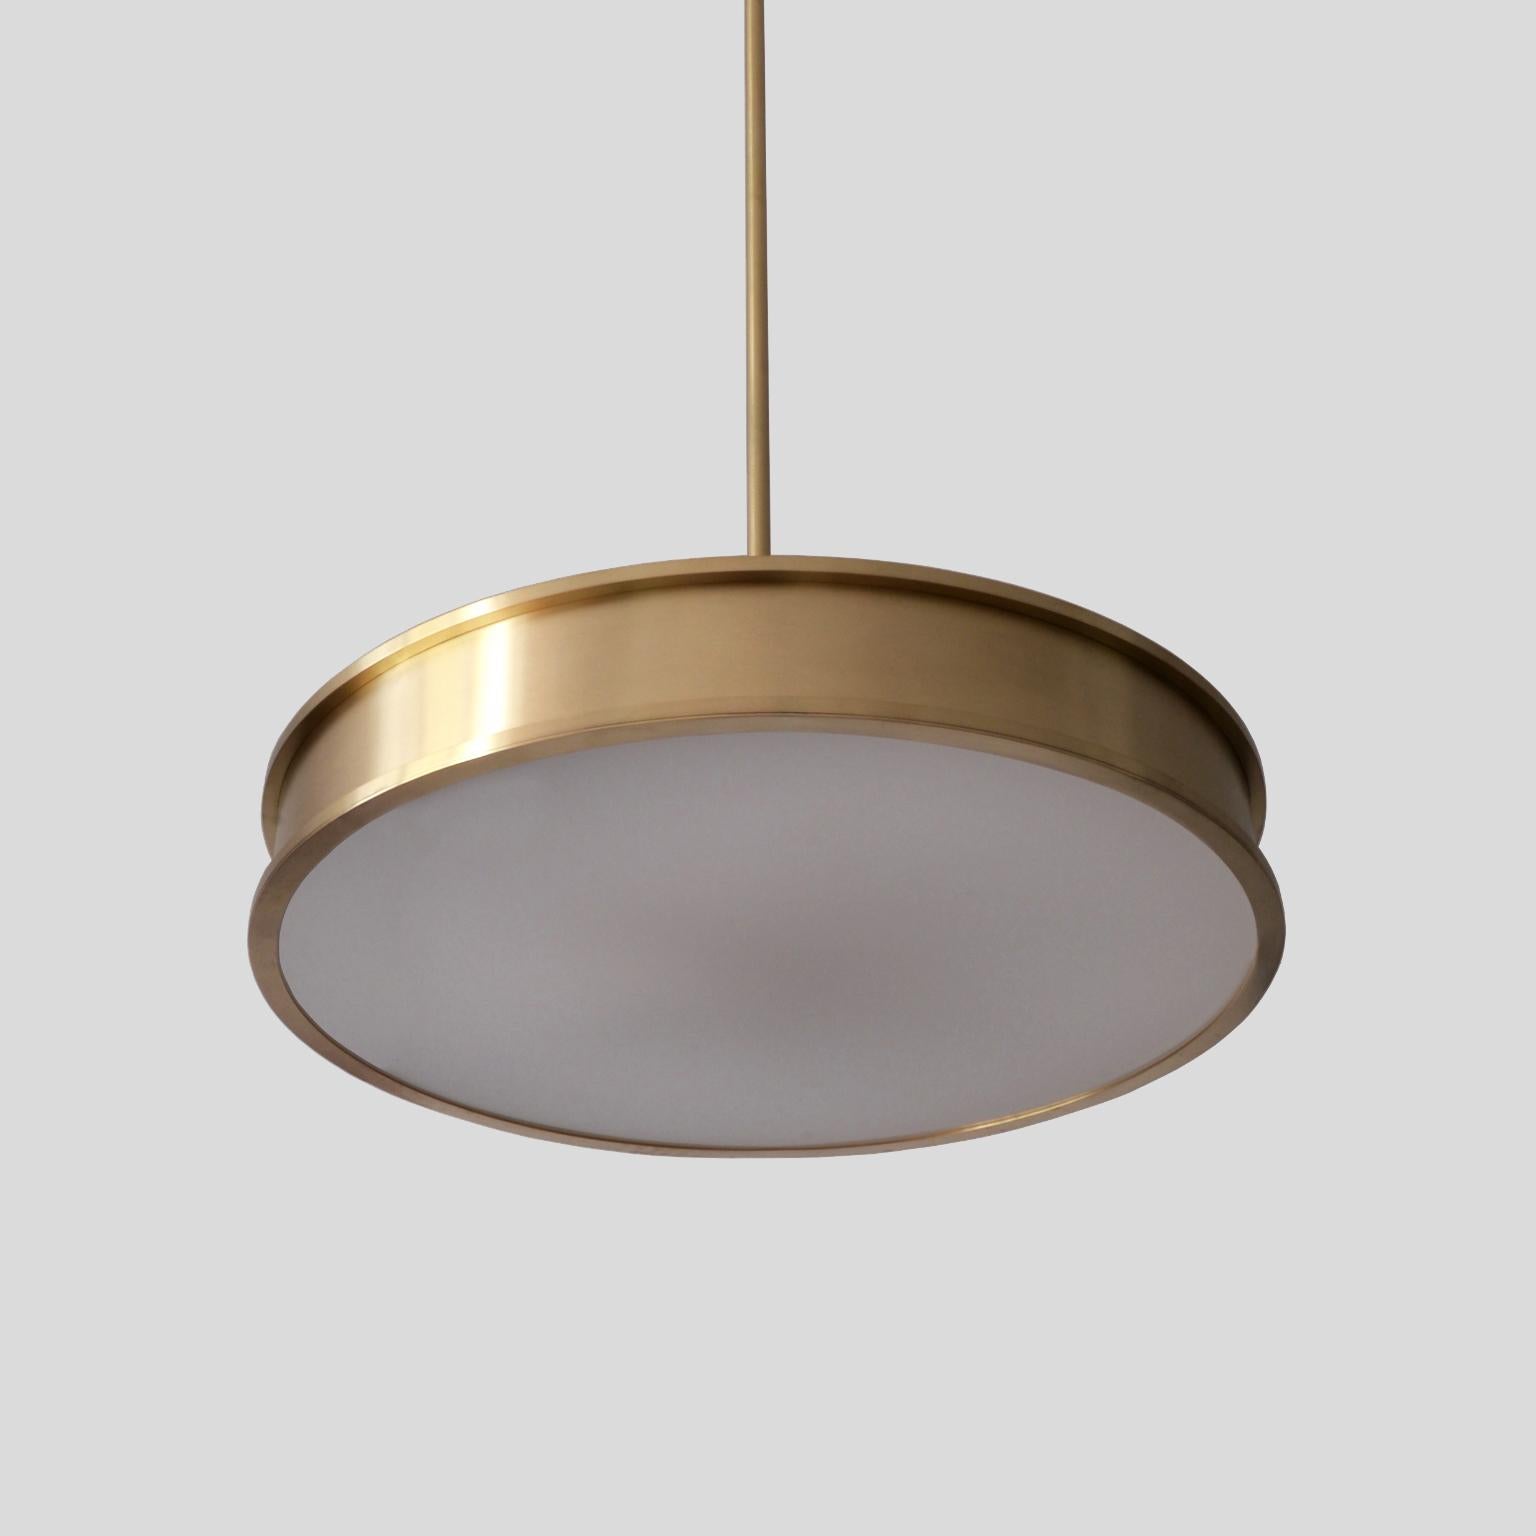 Bespoke Modernist Circular Pendant Light in Brushed Brass and Opal Glass, 2018 In New Condition For Sale In Berlin, DE